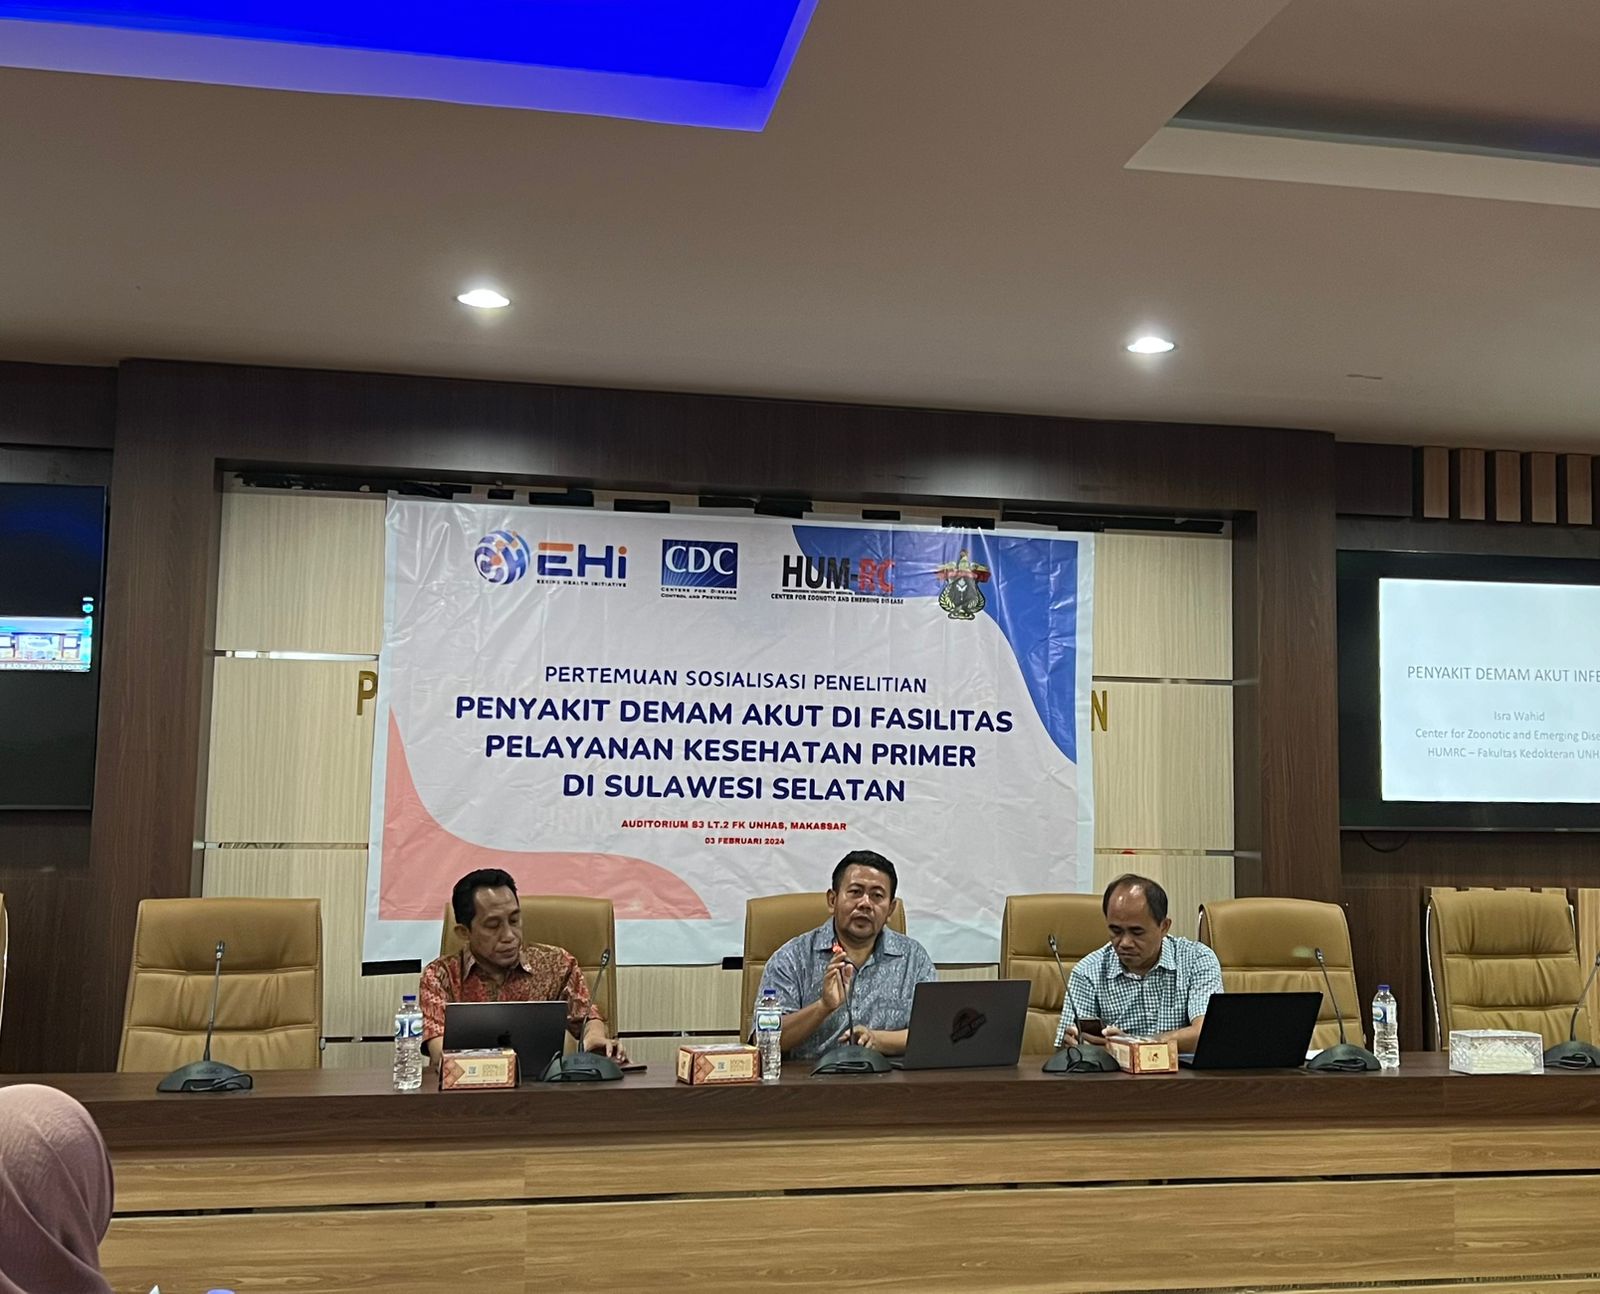 EHI launches a Study on Acute Febrile Illness at a Primary Health Center in South Sulawesi, Indonesia, in partnership with US-CDC Fort Collins and Faculty of Medicine, Hasanuddin University.